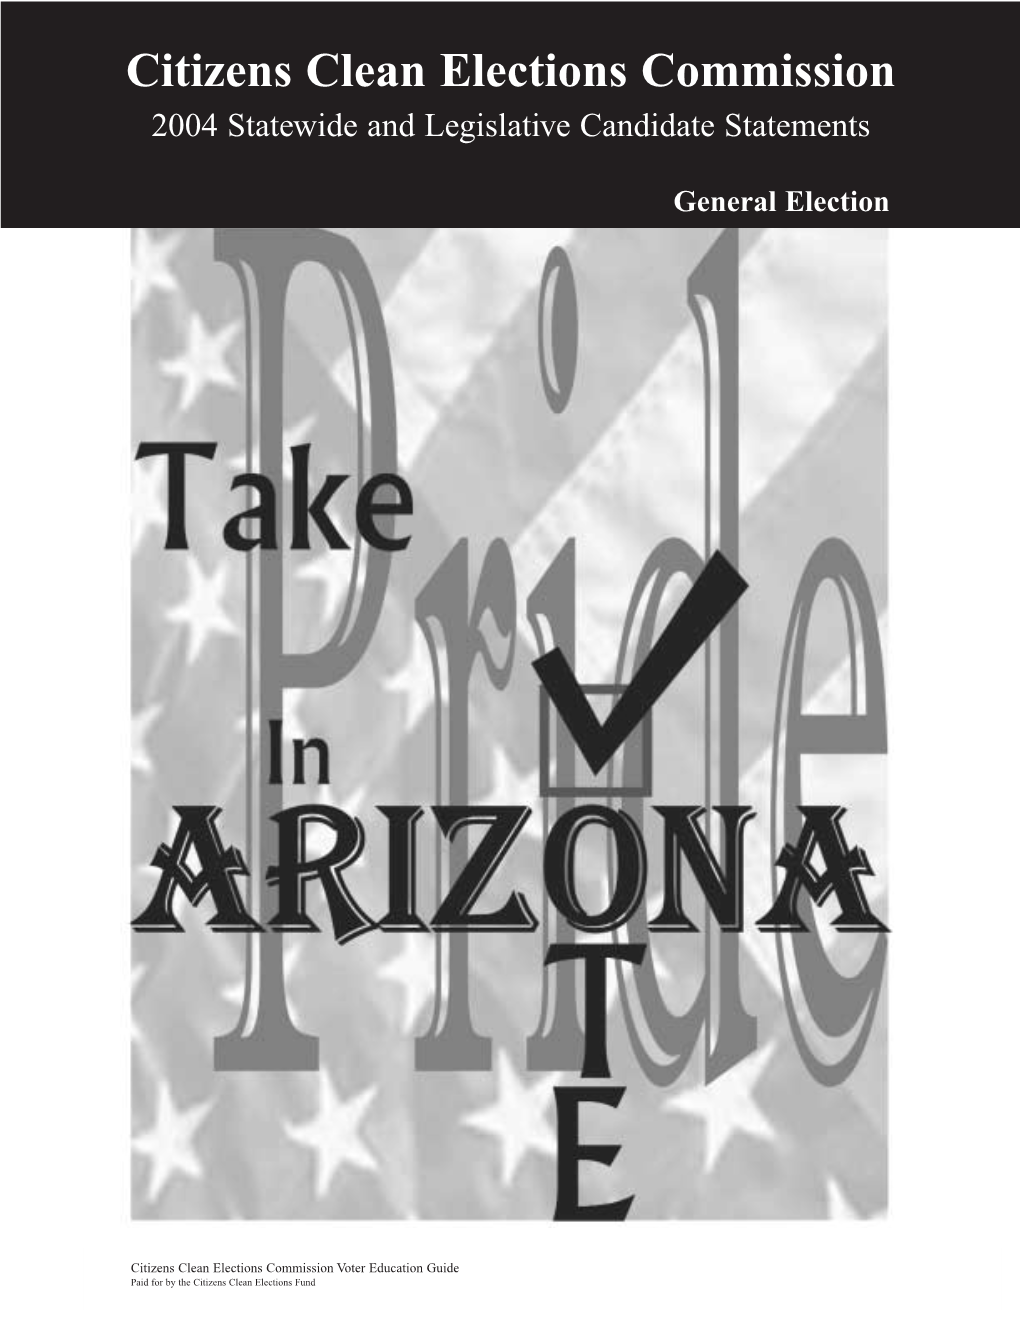 Citizens Clean Elections Commission 2004 Statewide and Legislative Candidate Statements